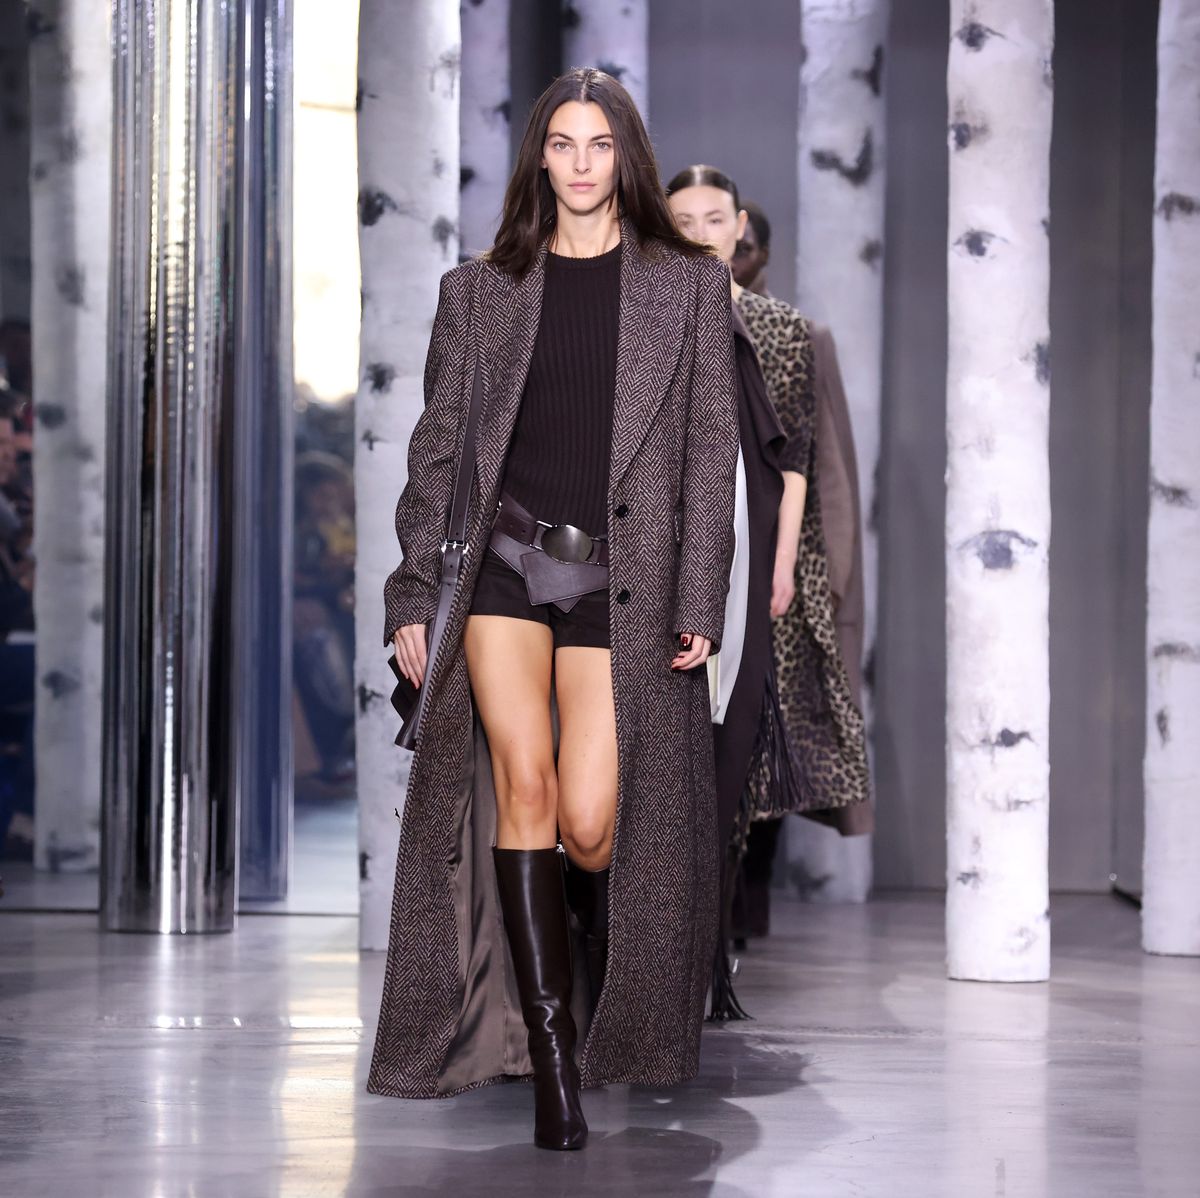 MICHAEL KORS COLLECTION FALL/WINTER 2023 – The Fashion With Style